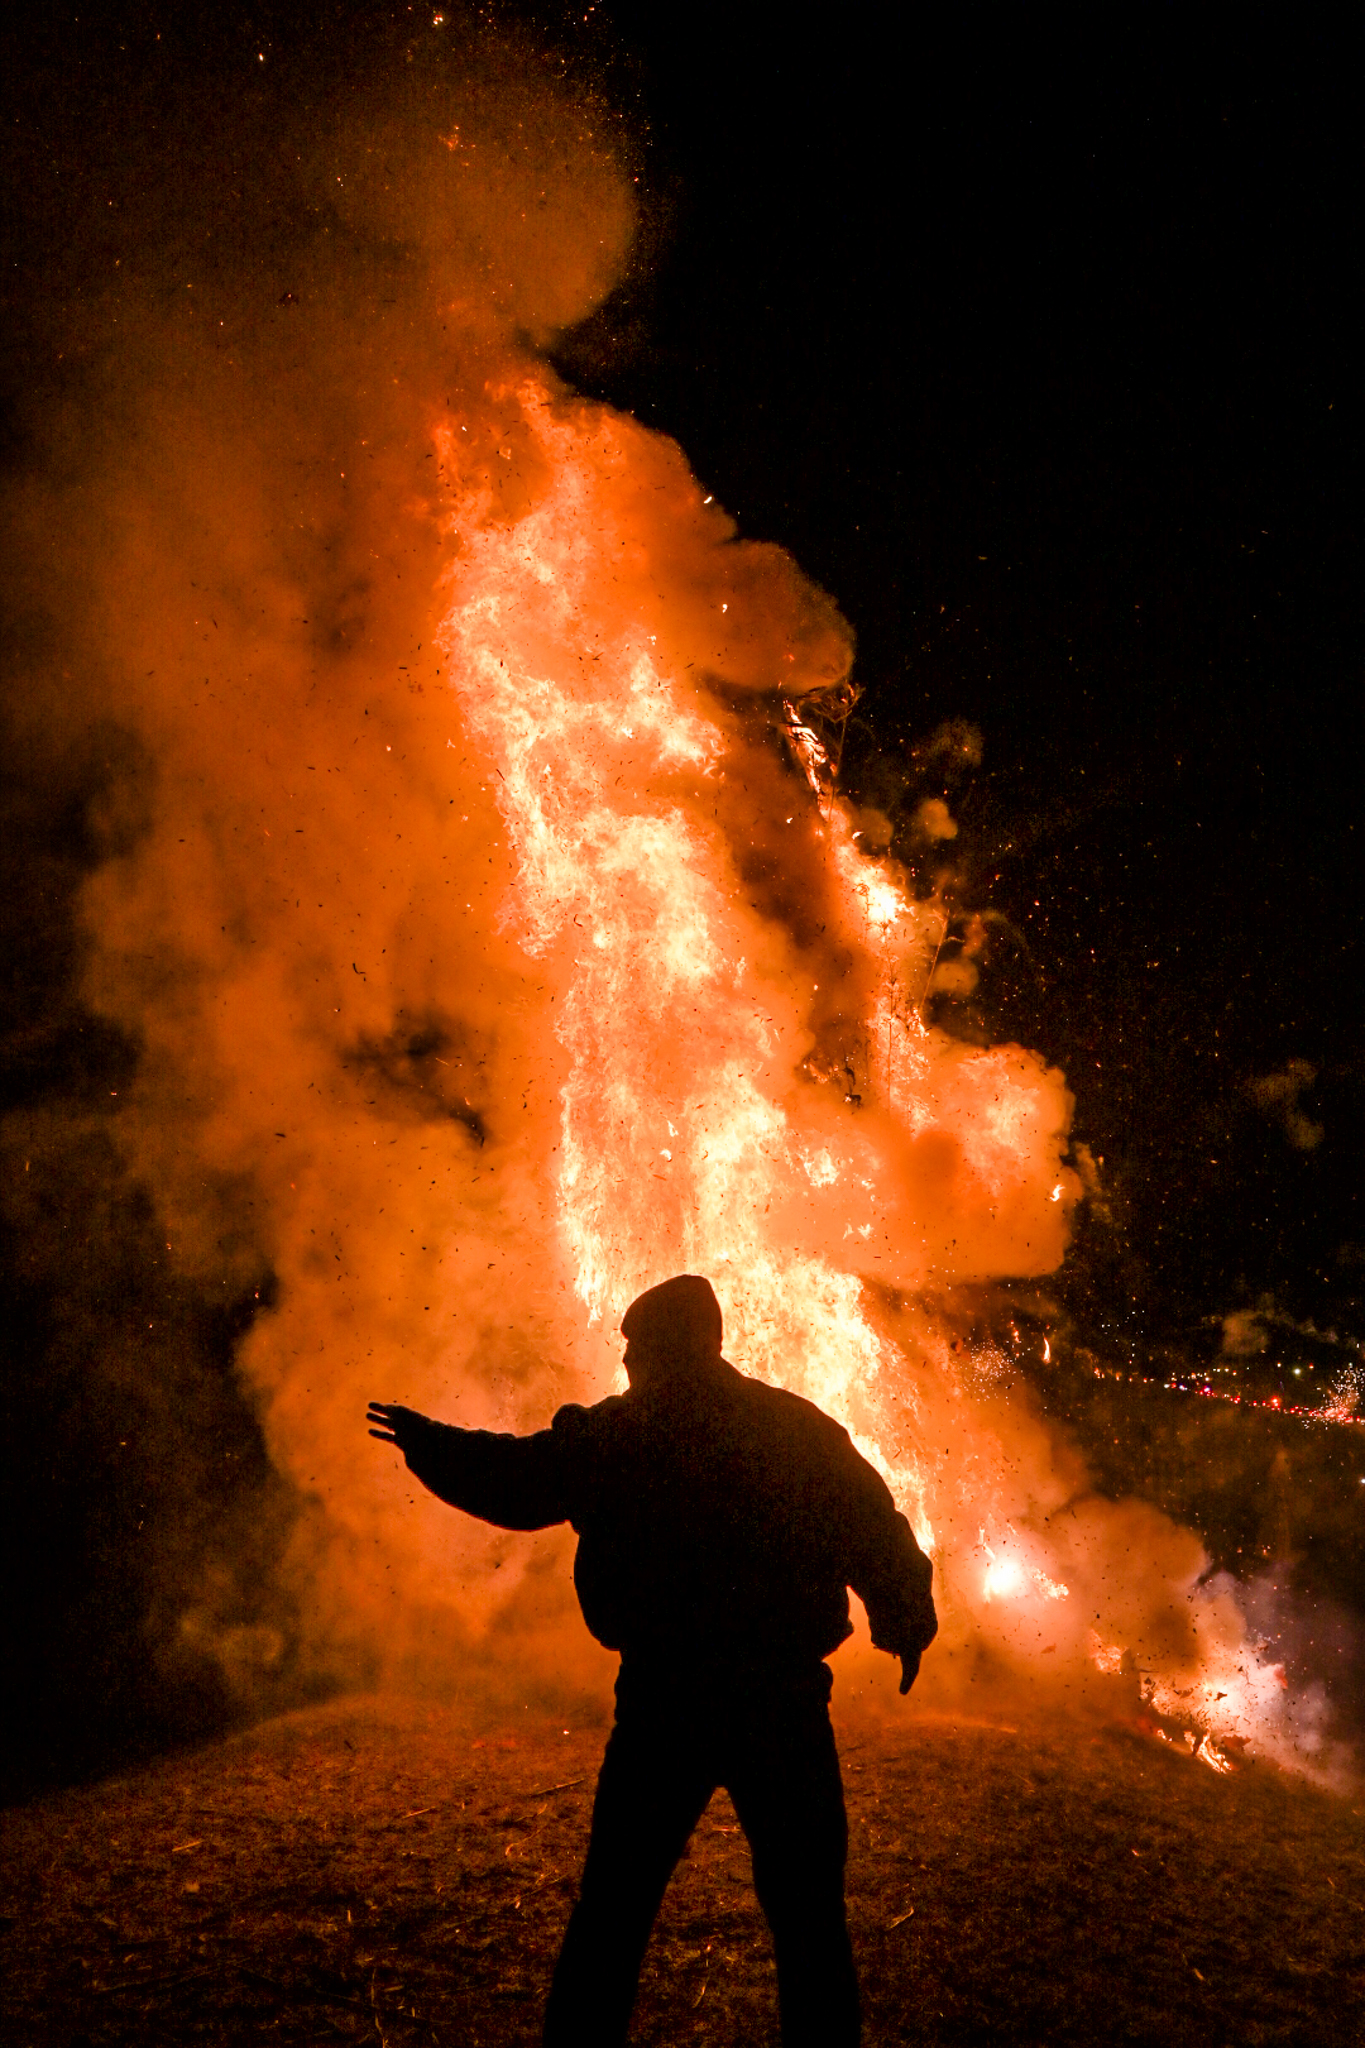 A man stands in front of a large bonfire on the levee in Grammercy, Louisiana